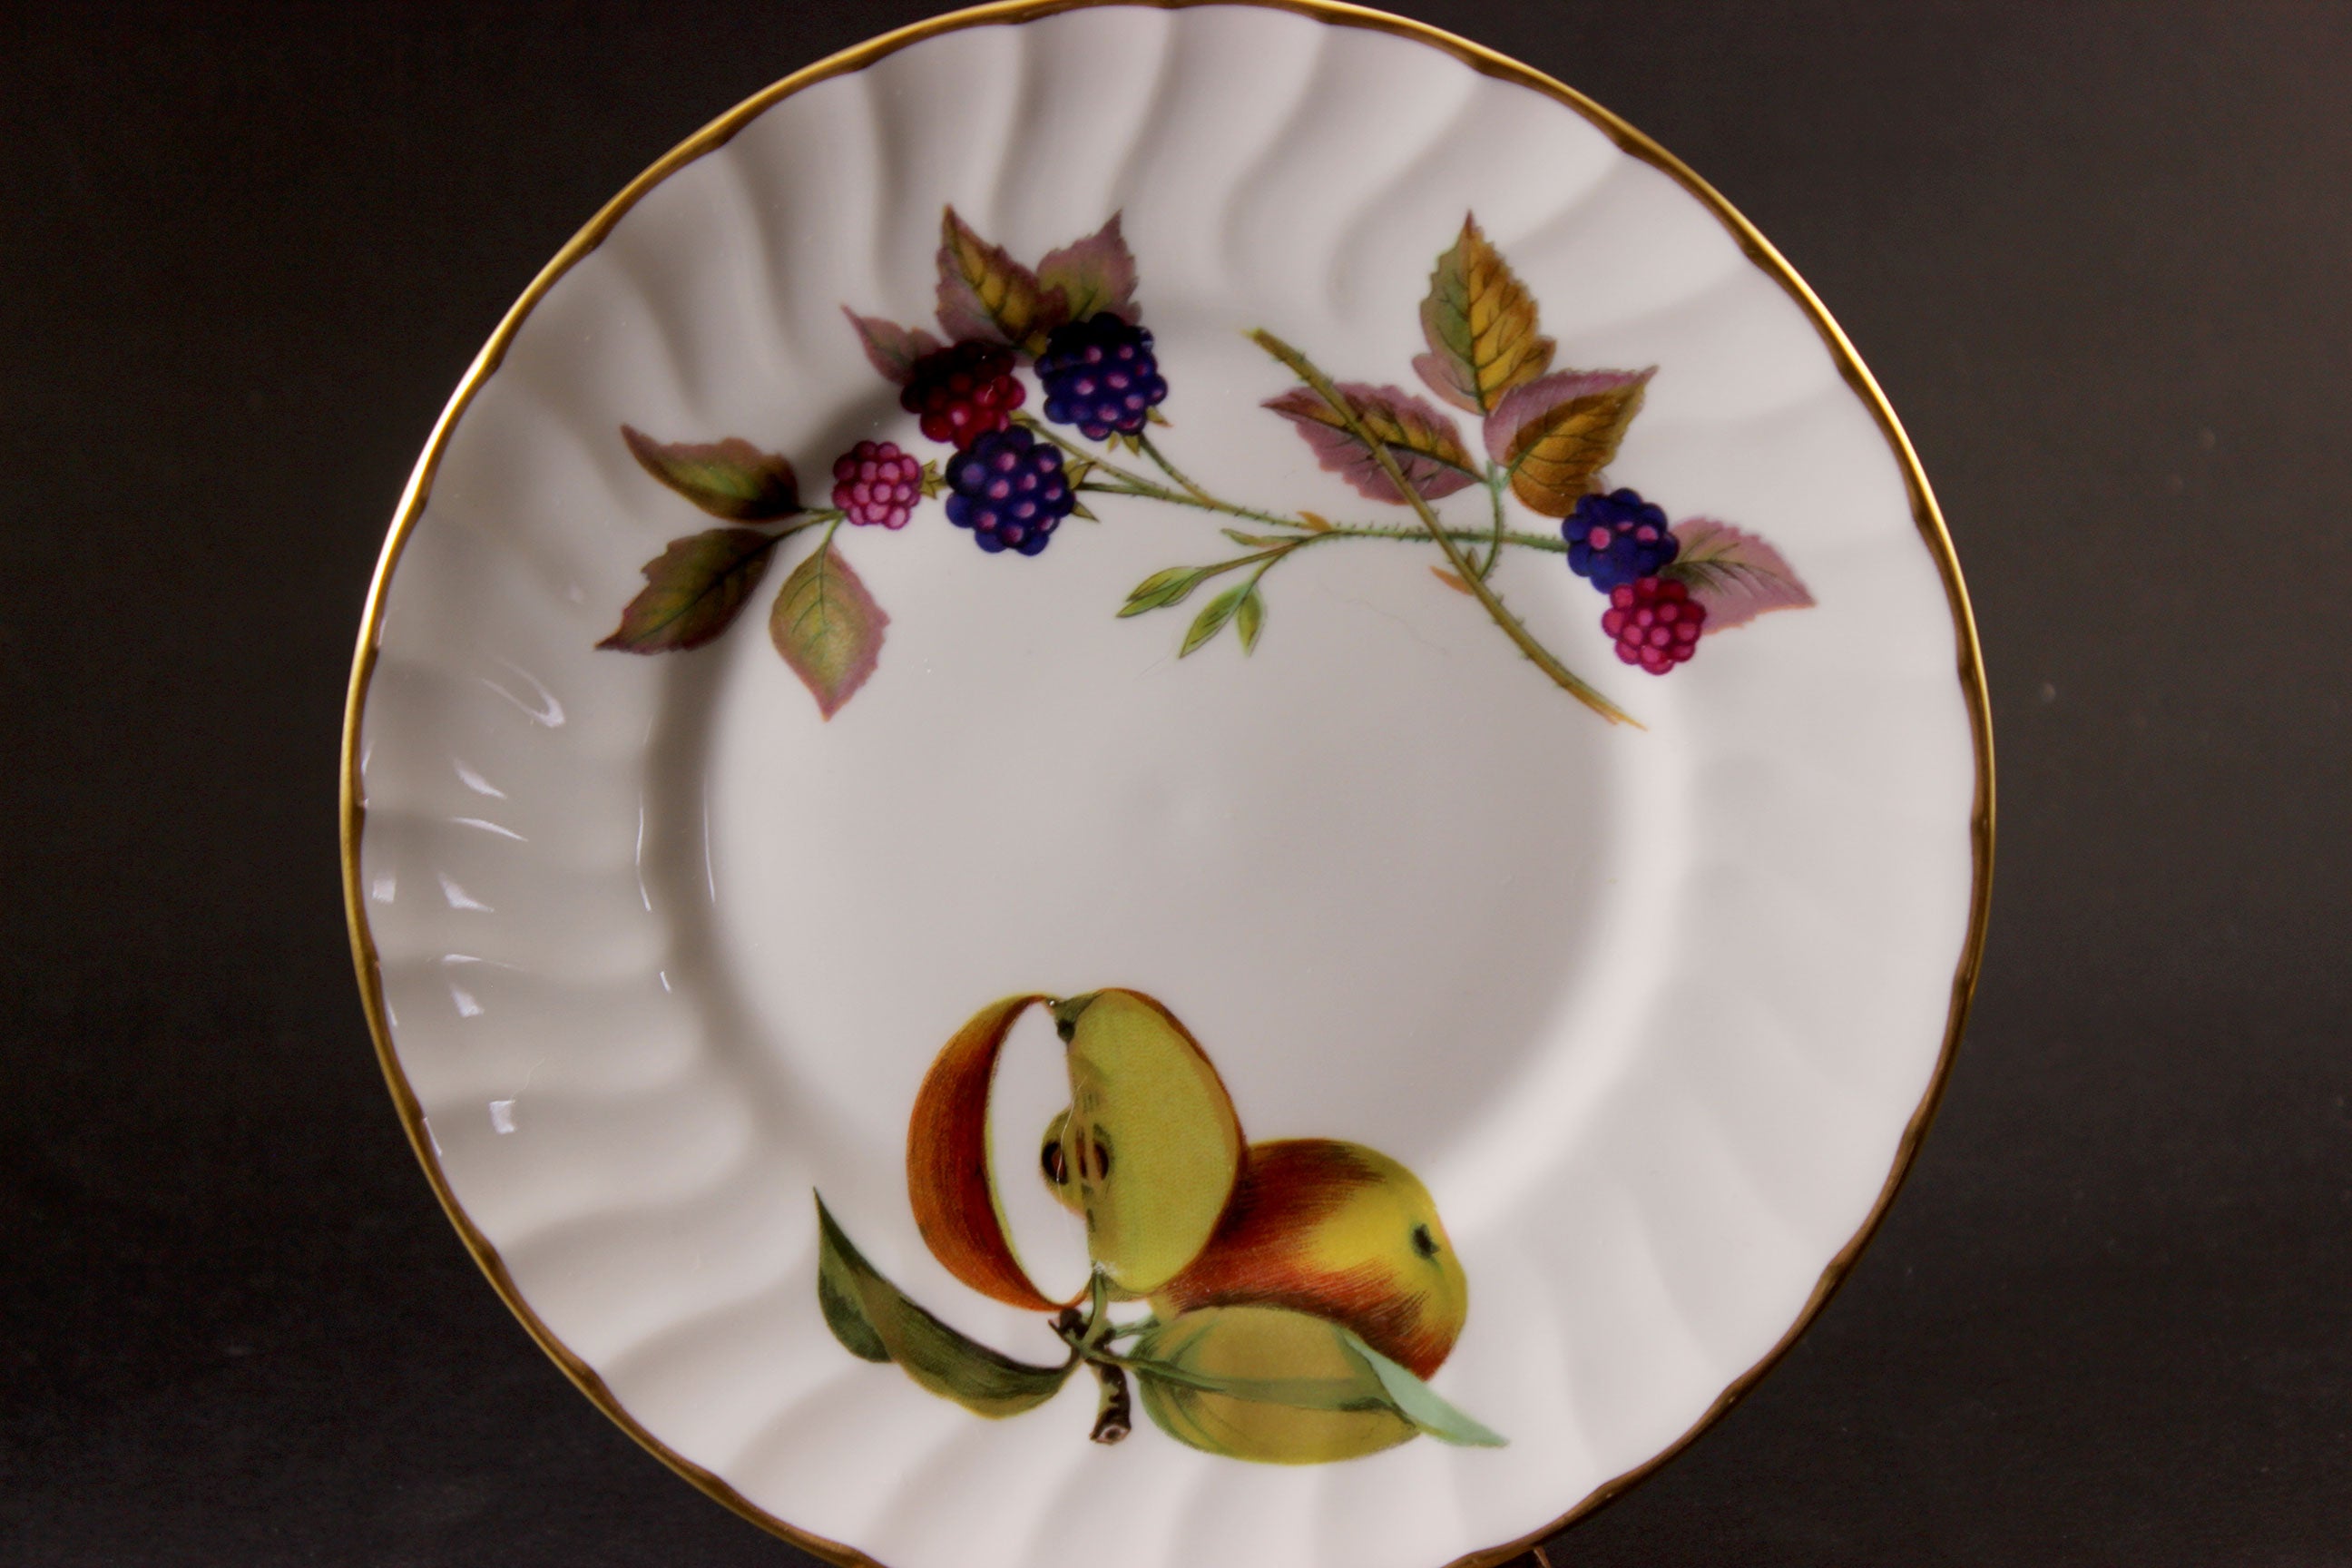 Evesham Gold Bread and Butter Plates